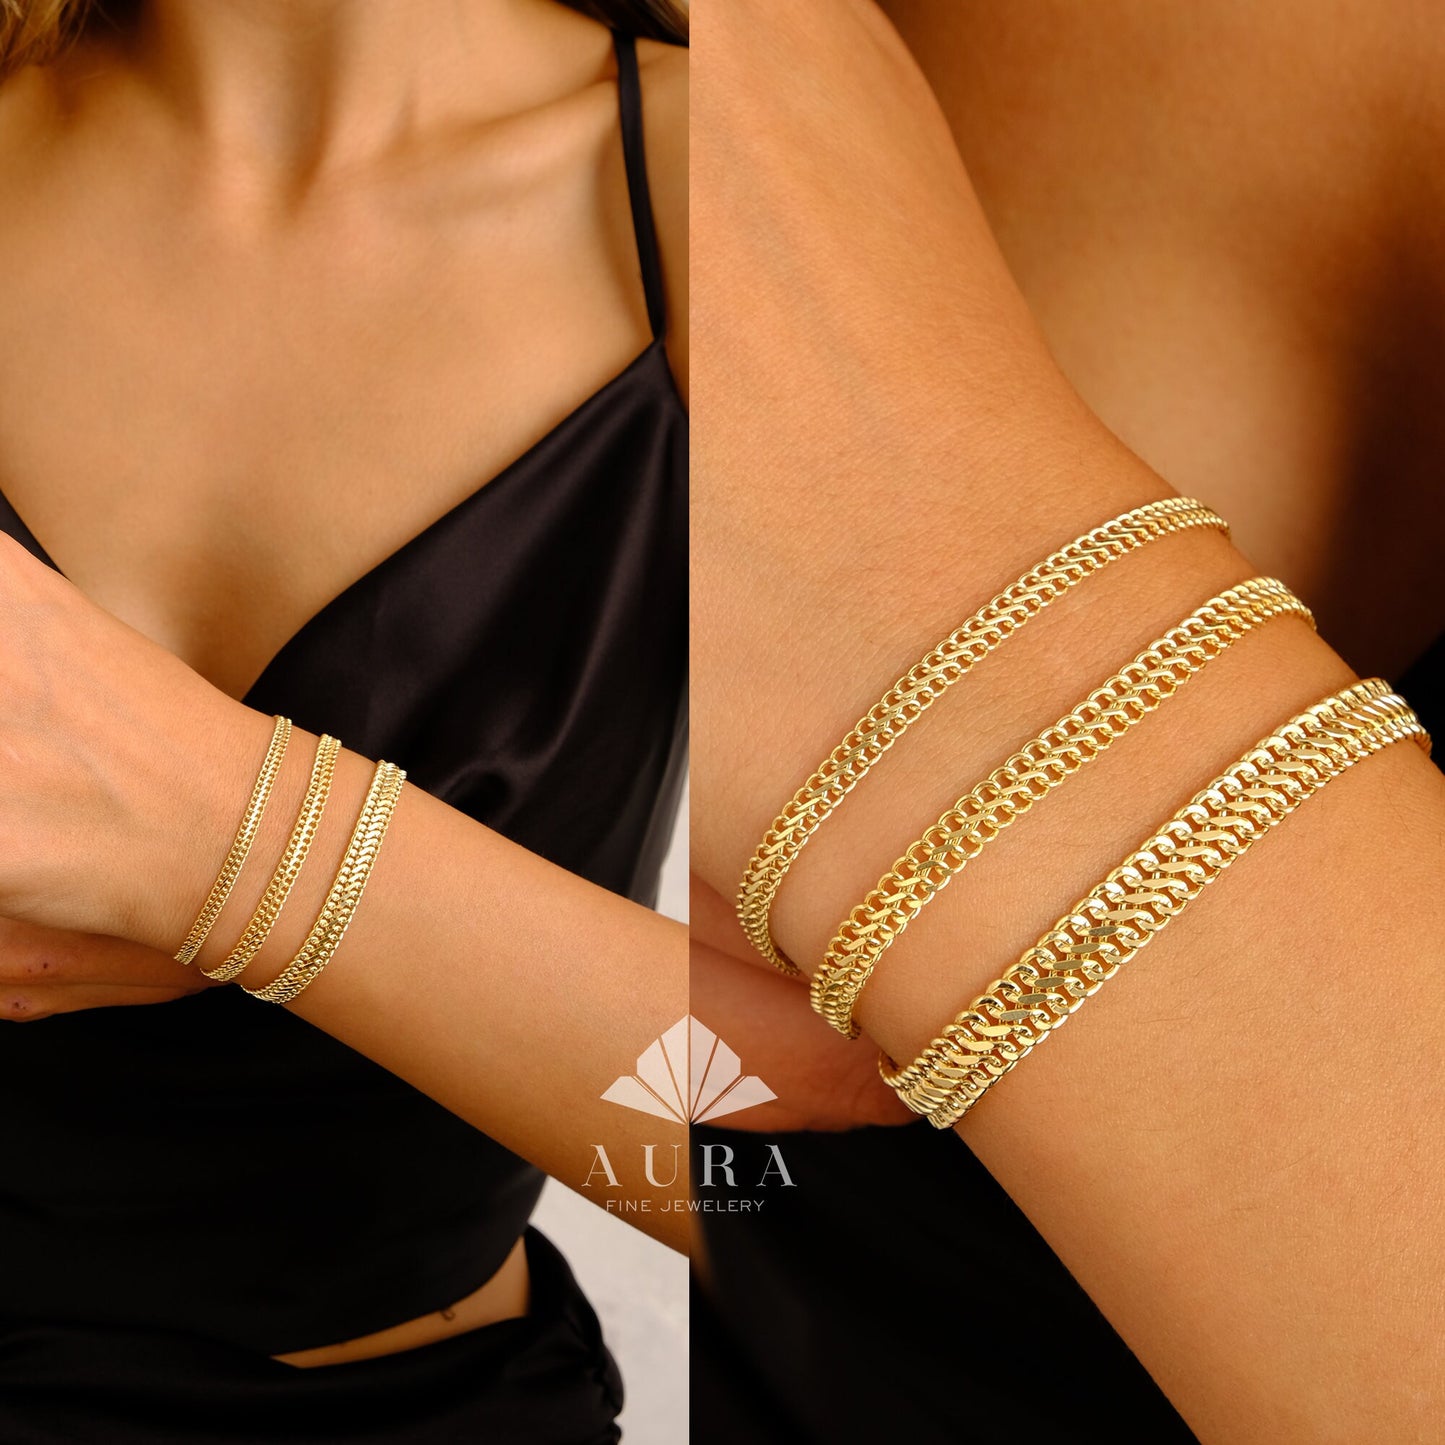 14K Gold Vienna Bracelet, Double Curb Chain Bracelet, Armoured Chain, Minimalist Jewelry, Gift for Her